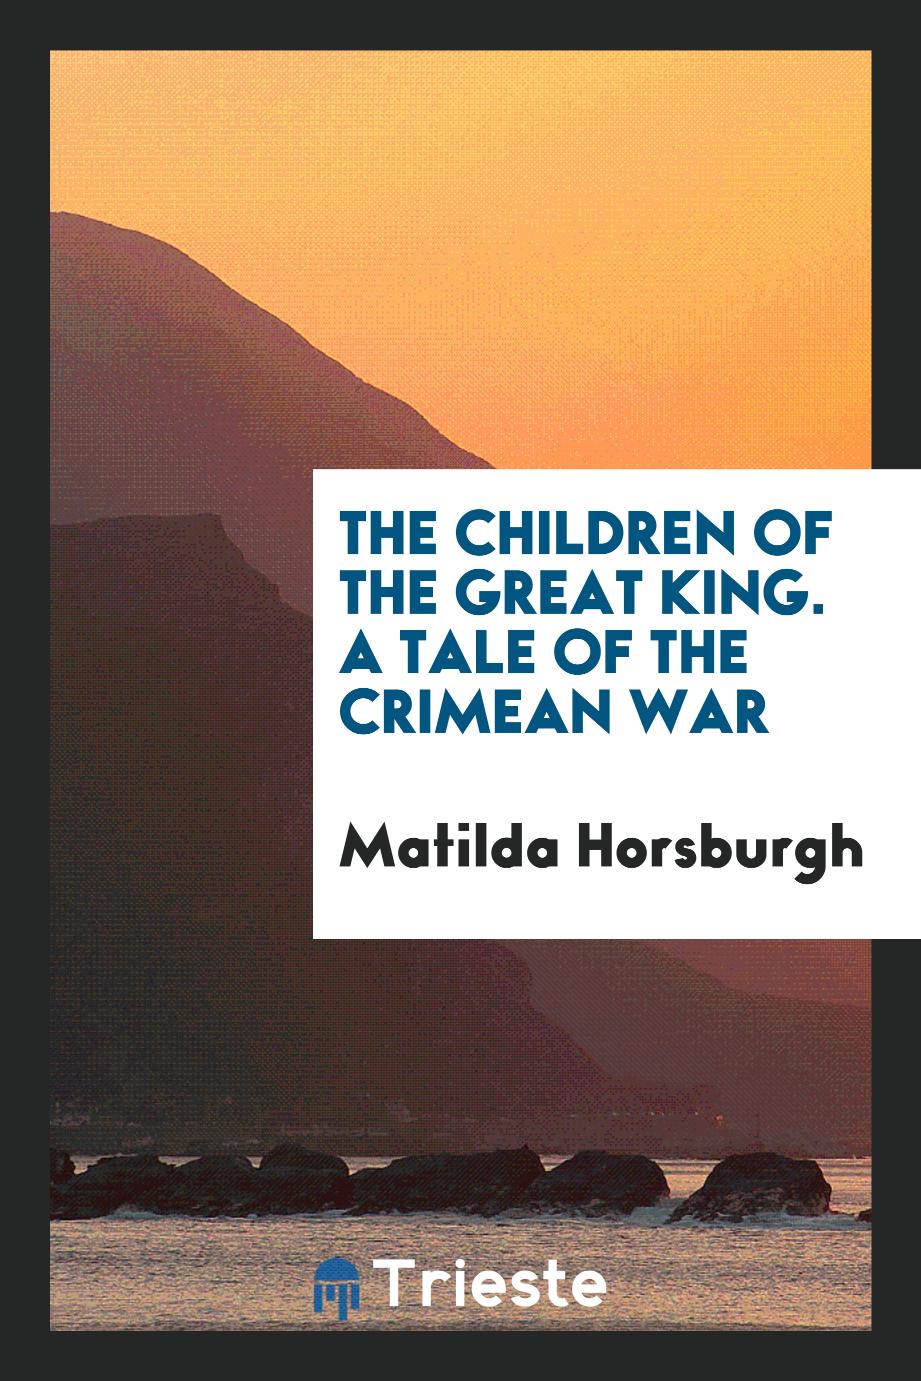 The Children of the Great King. A Tale of the Crimean War